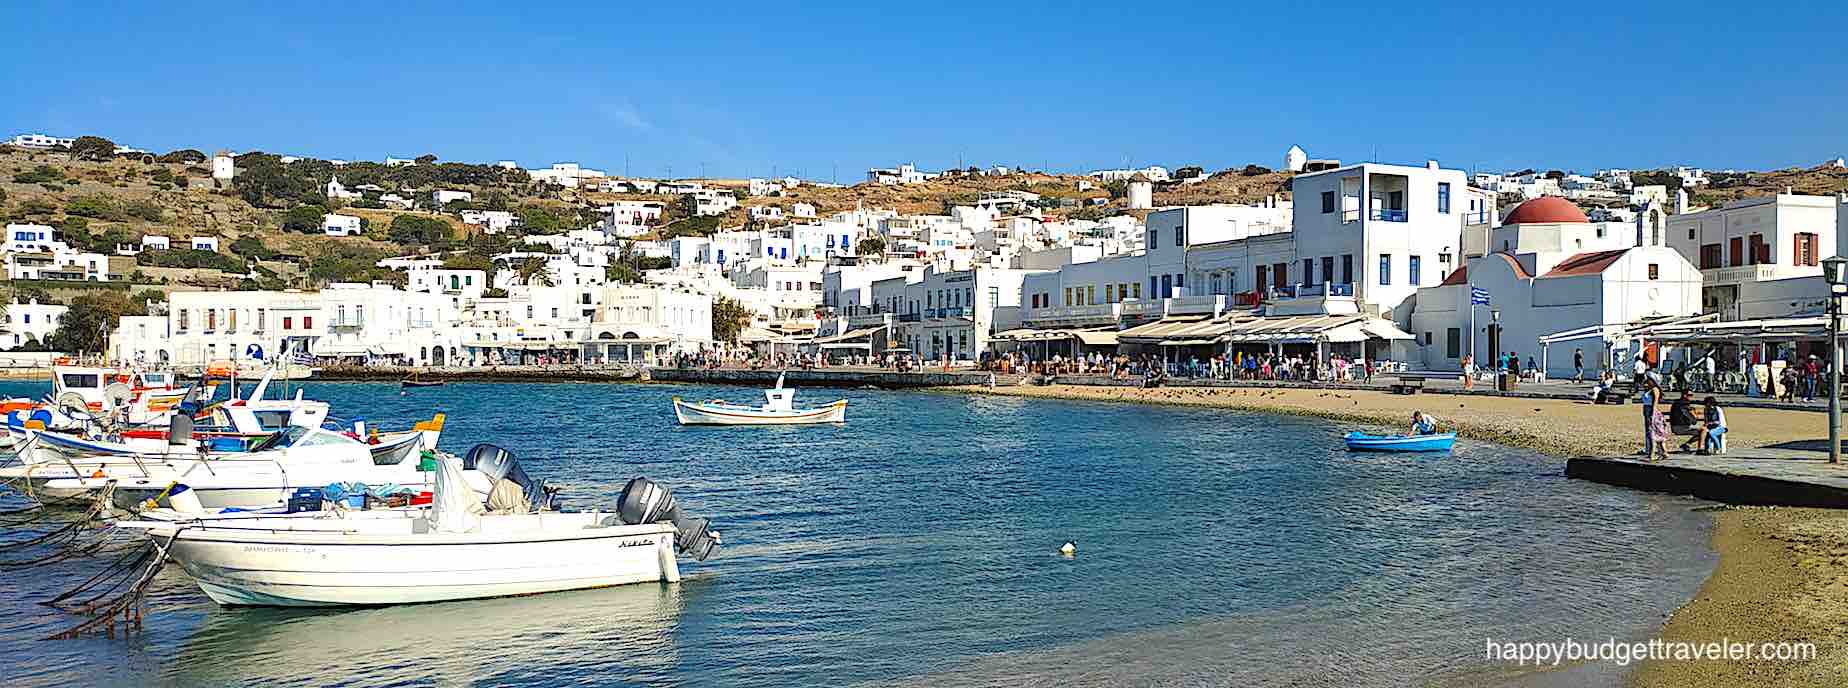 Picture of the waterfront of Mykonos